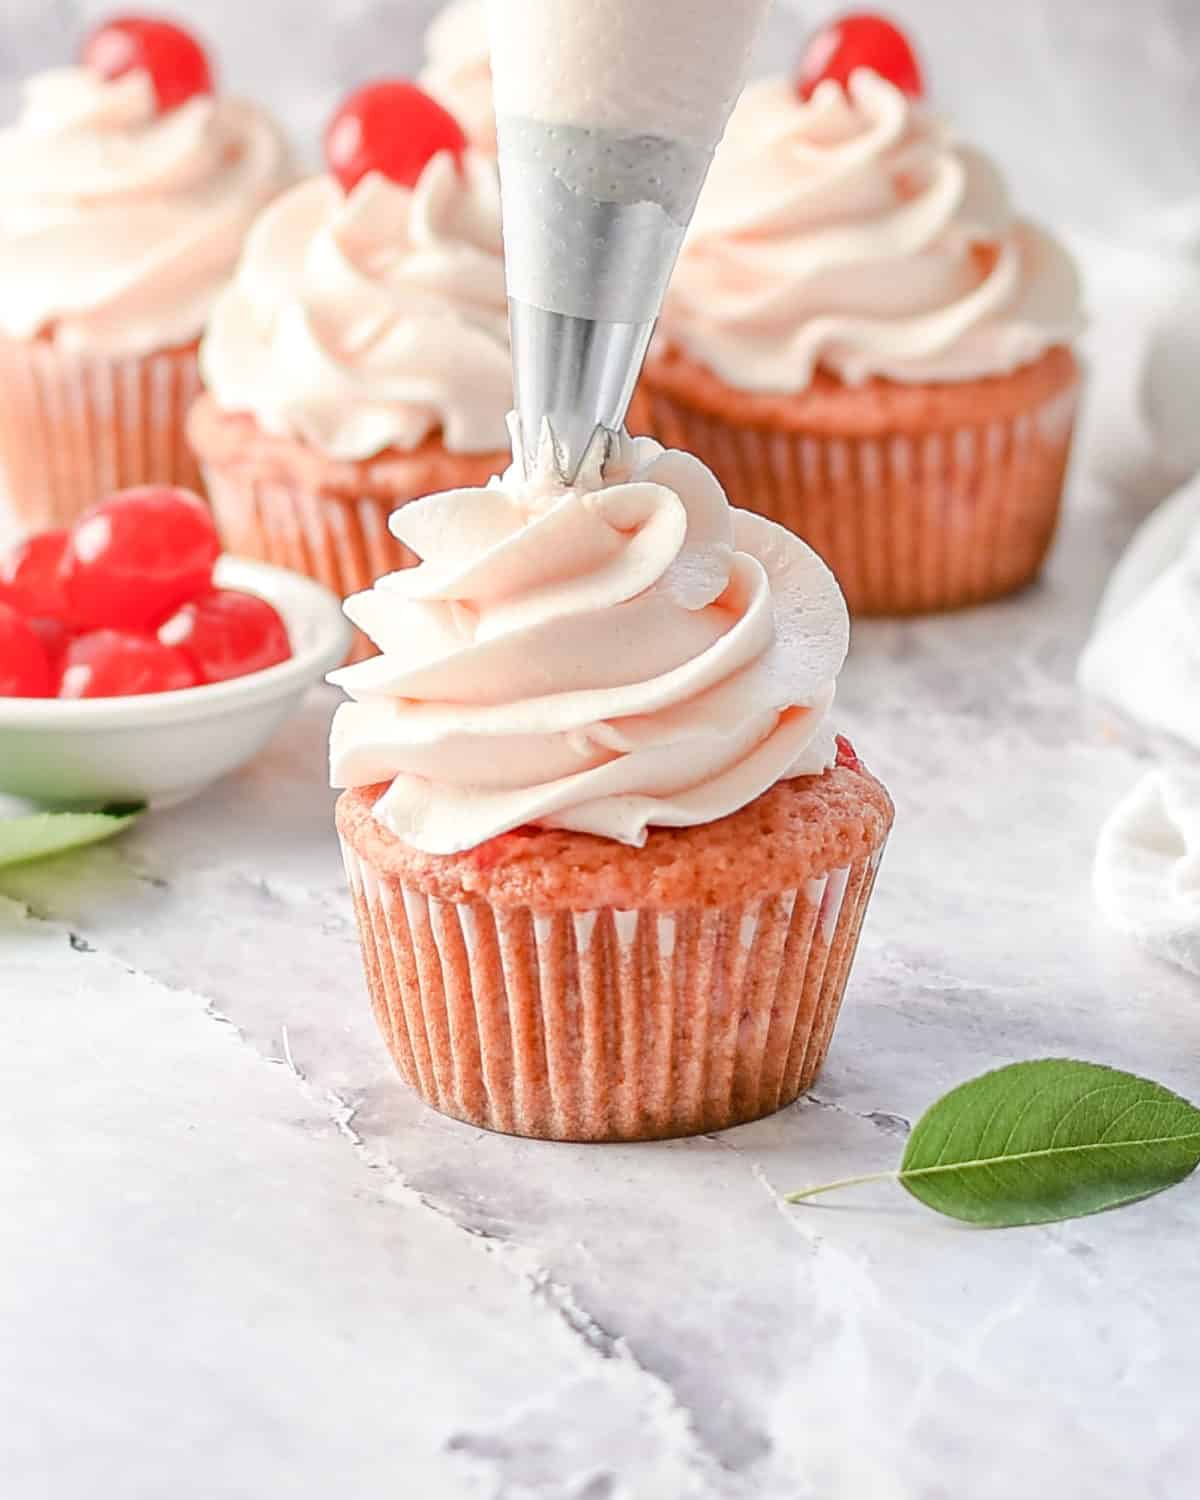 Piping frosting onto a cupcake.